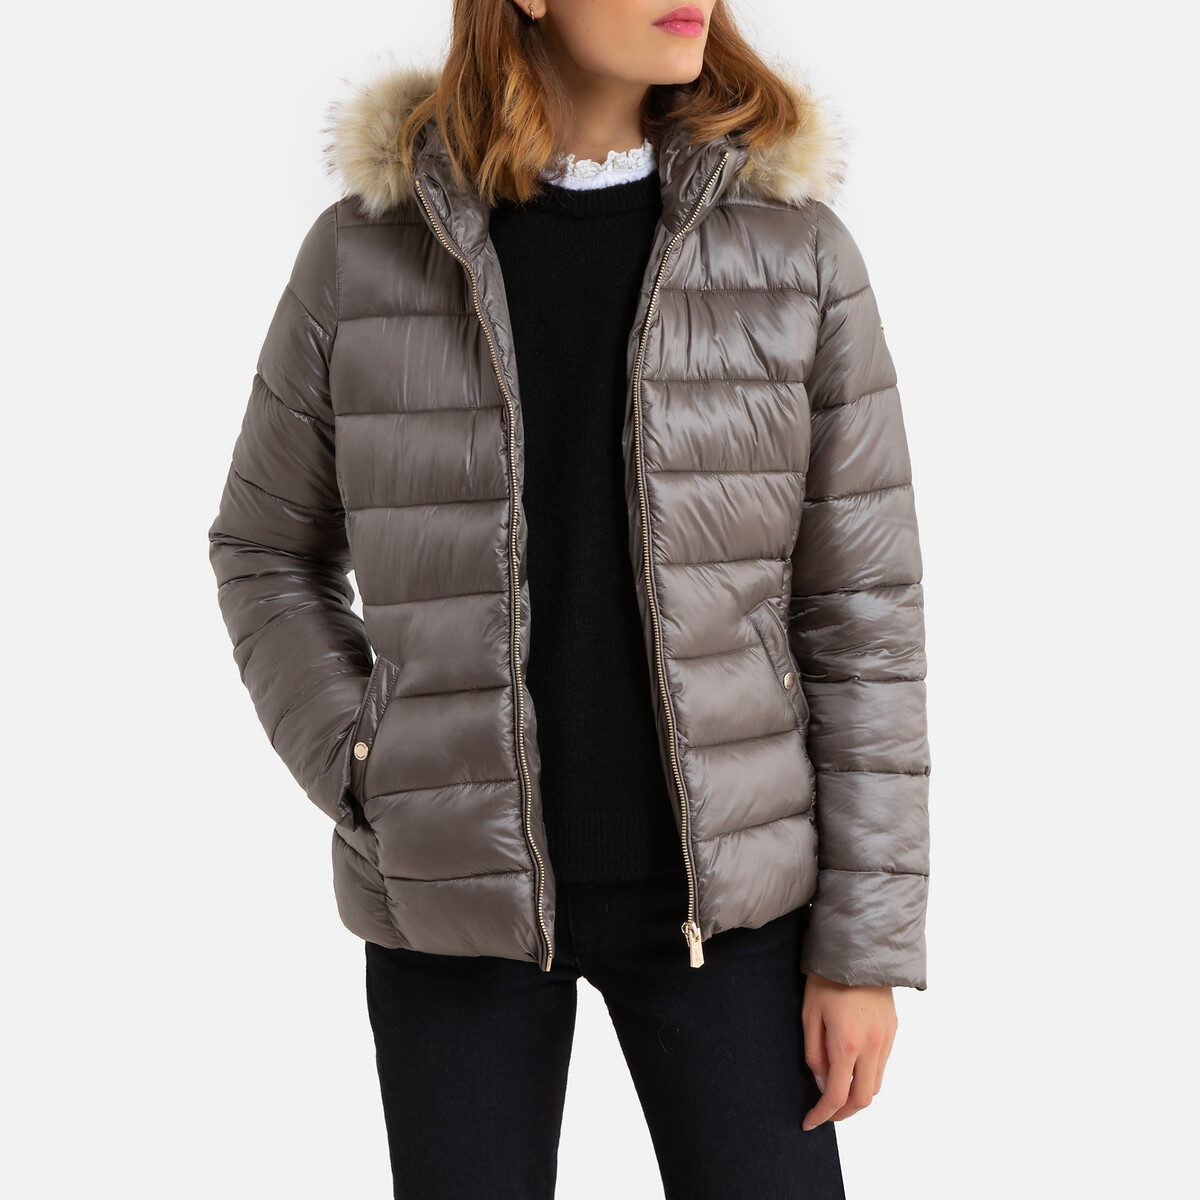 Zip-Up Padded Jacket with Faux Fur Hood